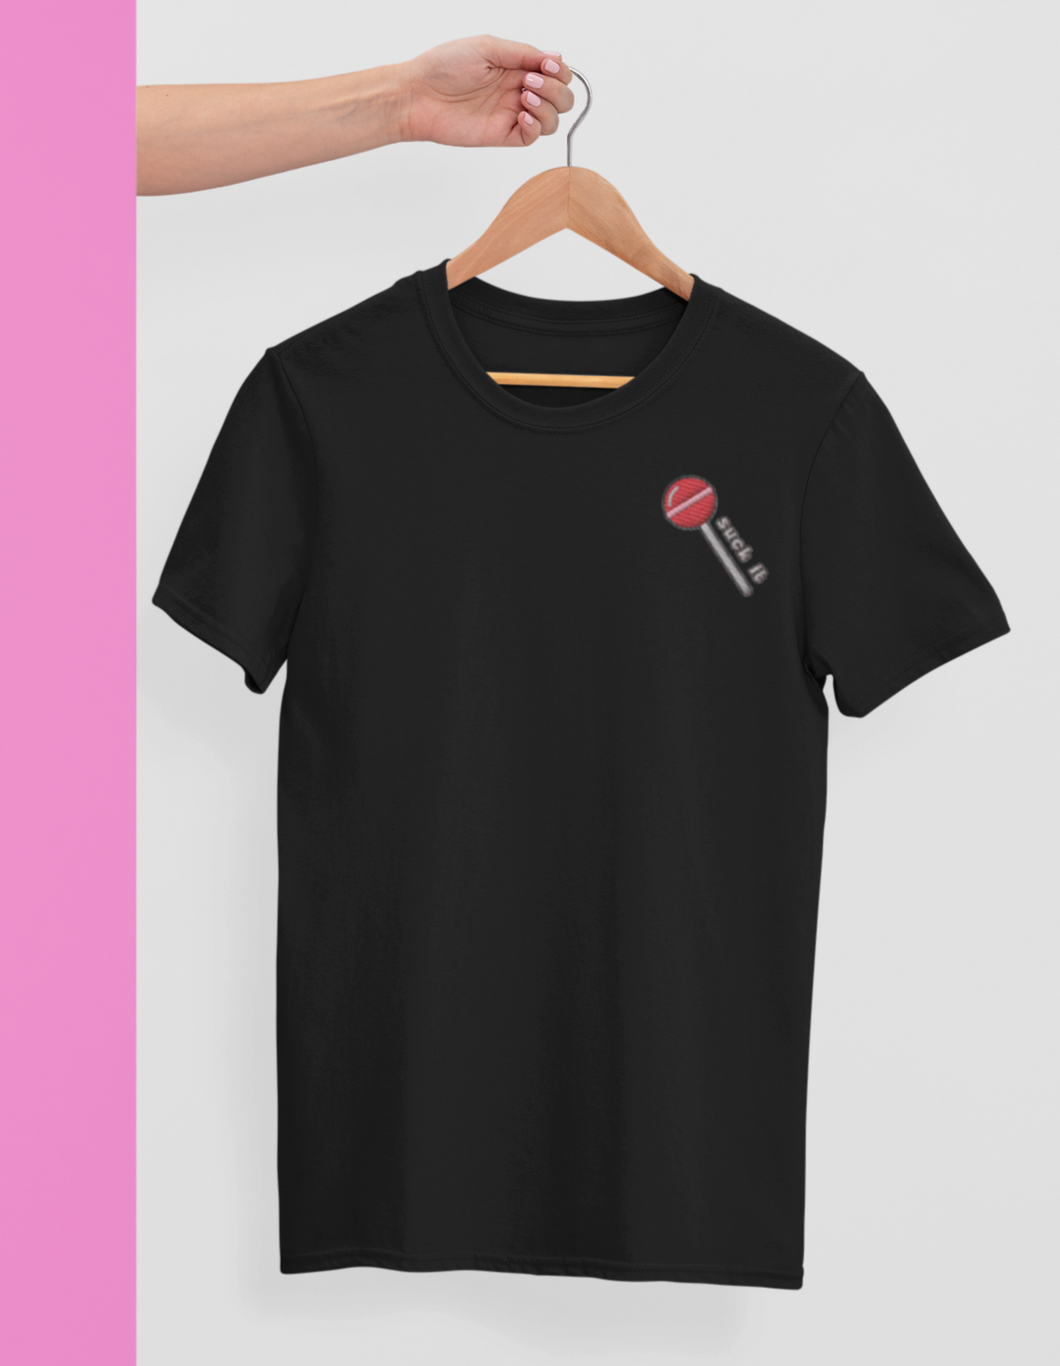 Suck it embroidered t-shirt in black on a hanger